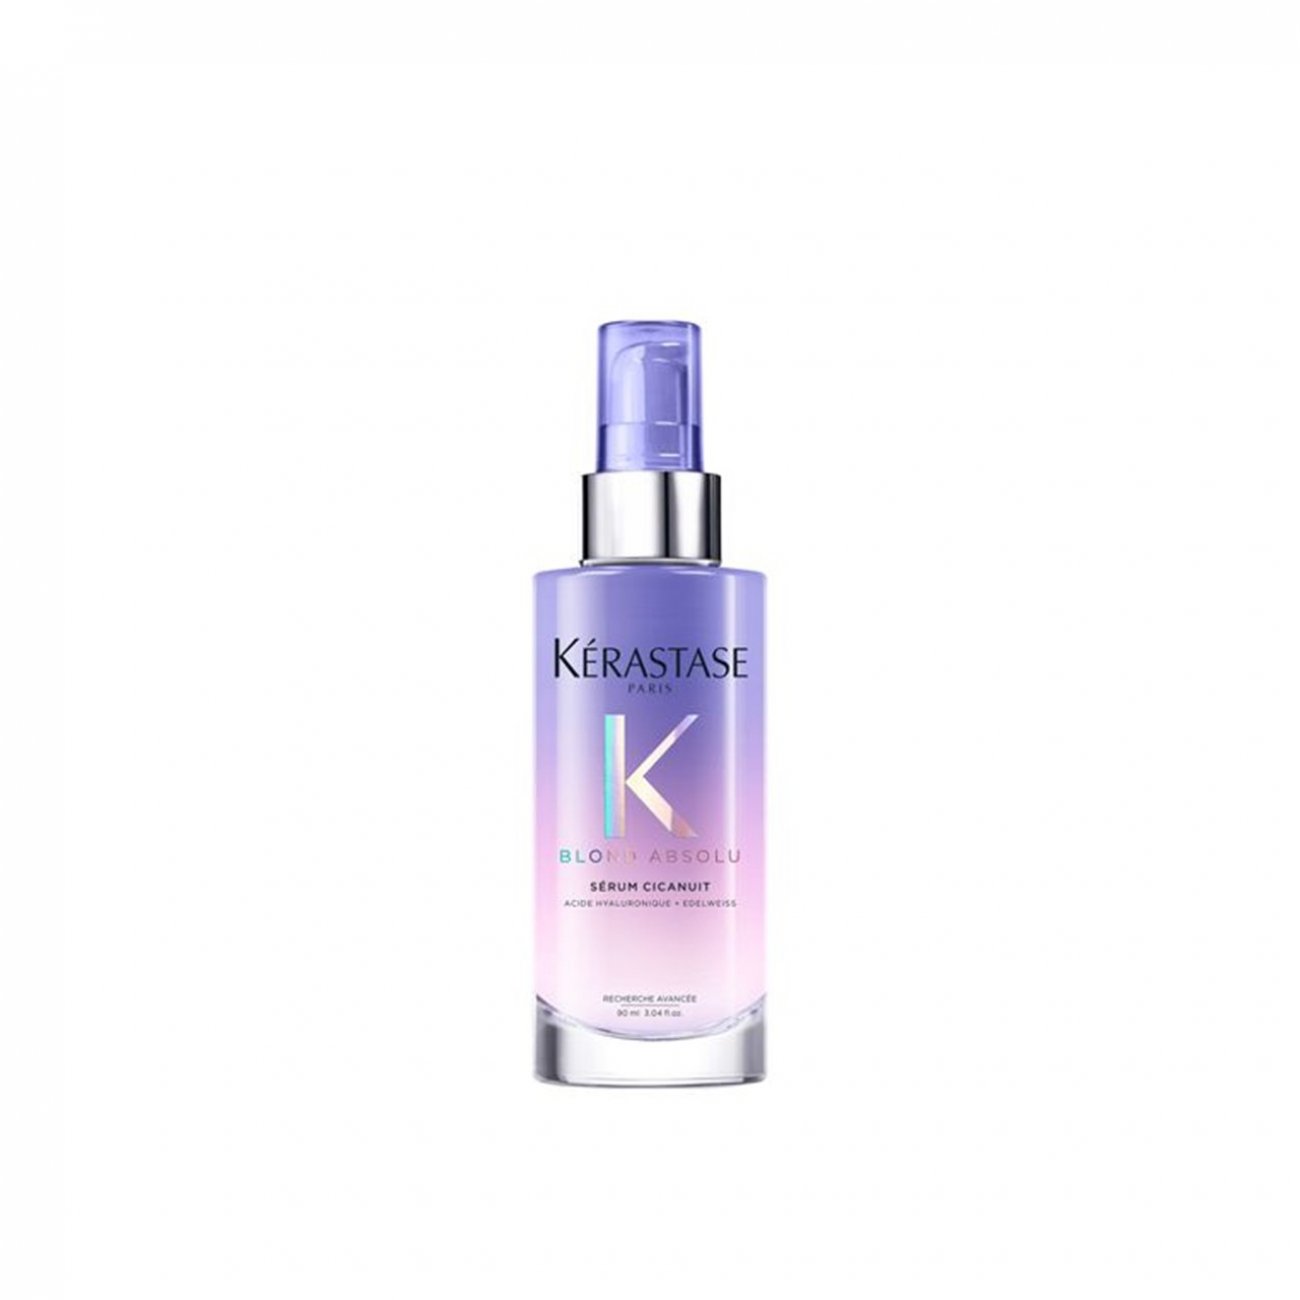 Kérastase  The LimitedEdition Elixir Ultime Serum and 8H Magic Night Serum  from Kérastase are the ultimate hair care essentials that make your hair  feel soft shiny and healthy Because you deserve